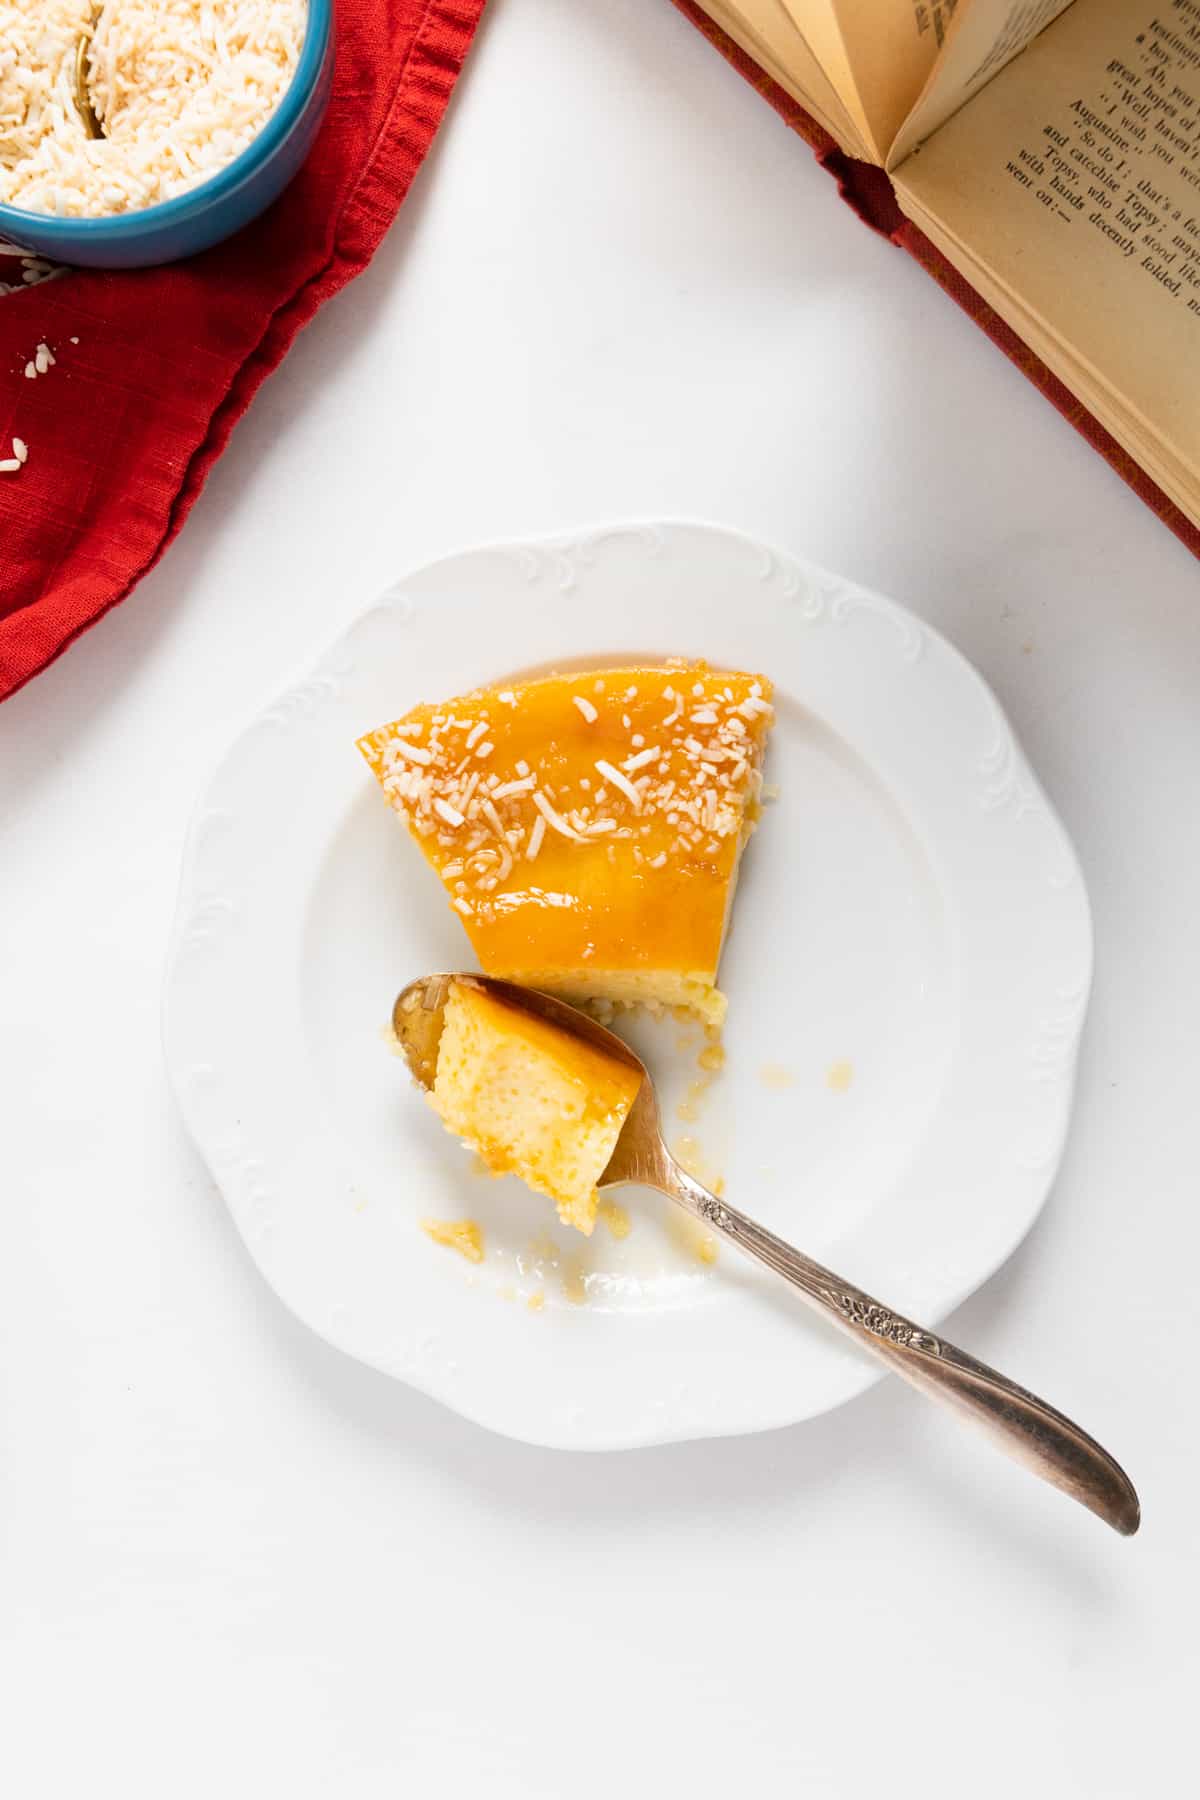 a slice of flan with a spoon and some flan in the spoon, an old book in the corner